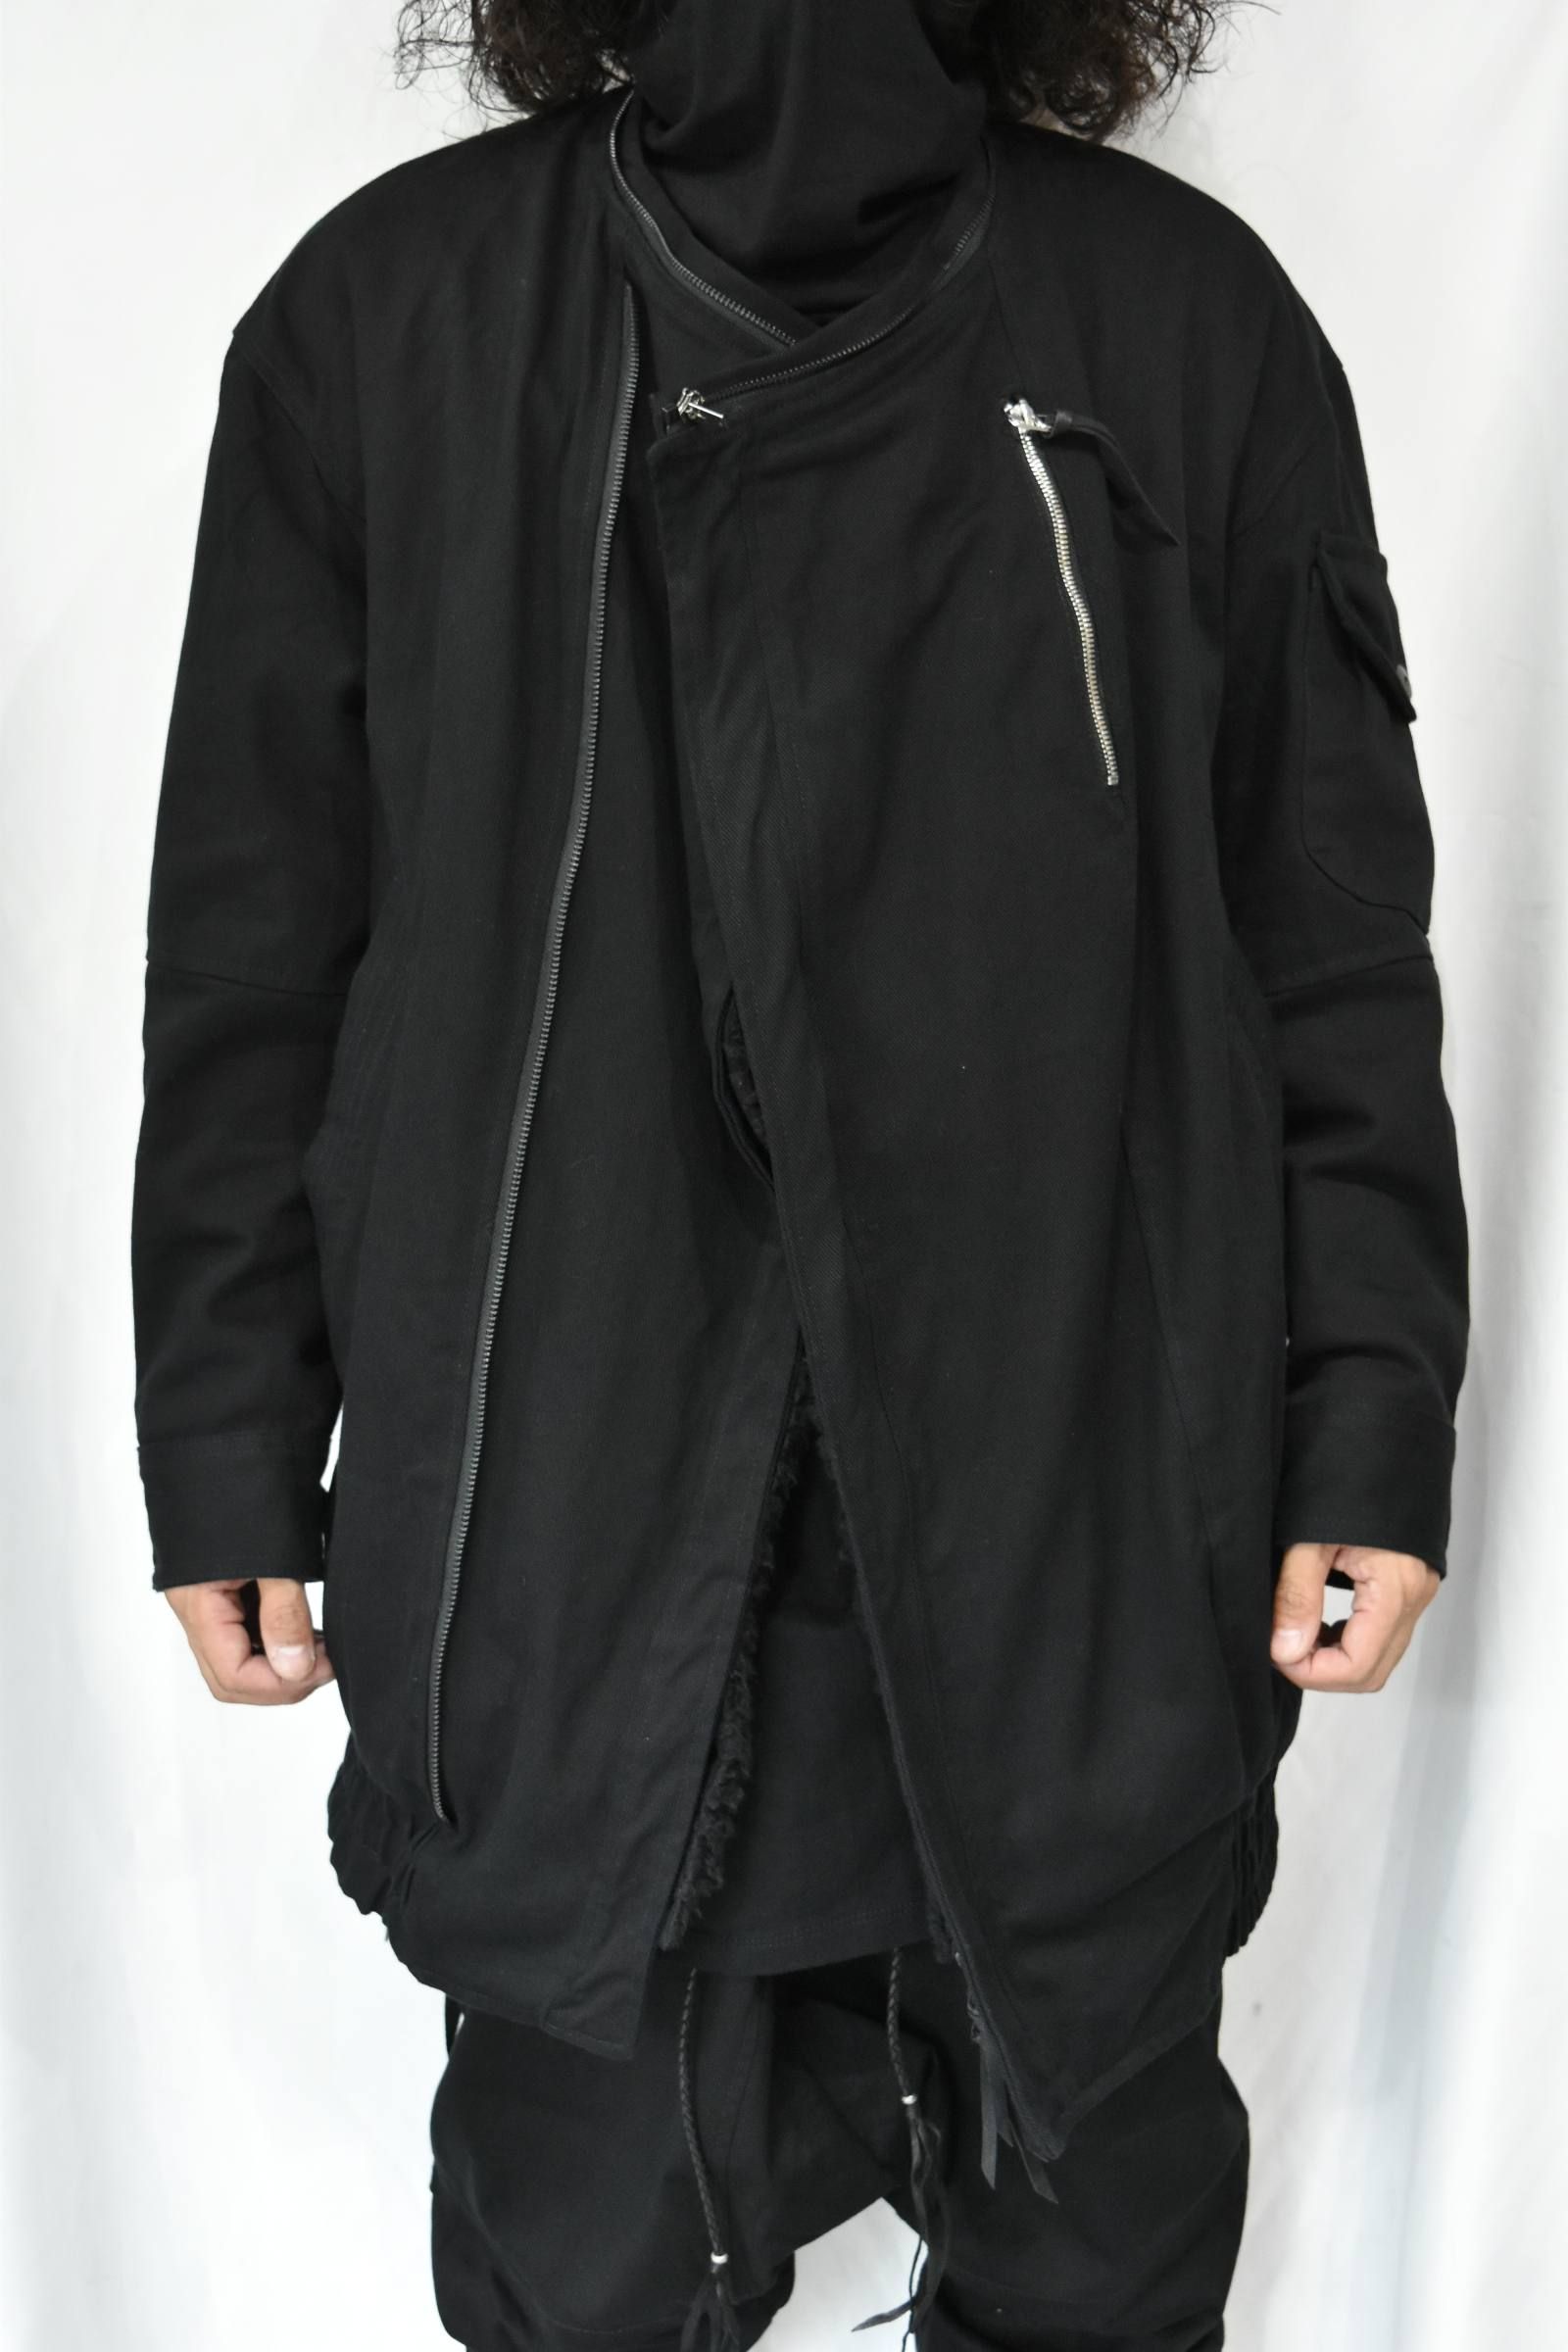 KMRii - Hooded Twill JKT 02 | chord online store